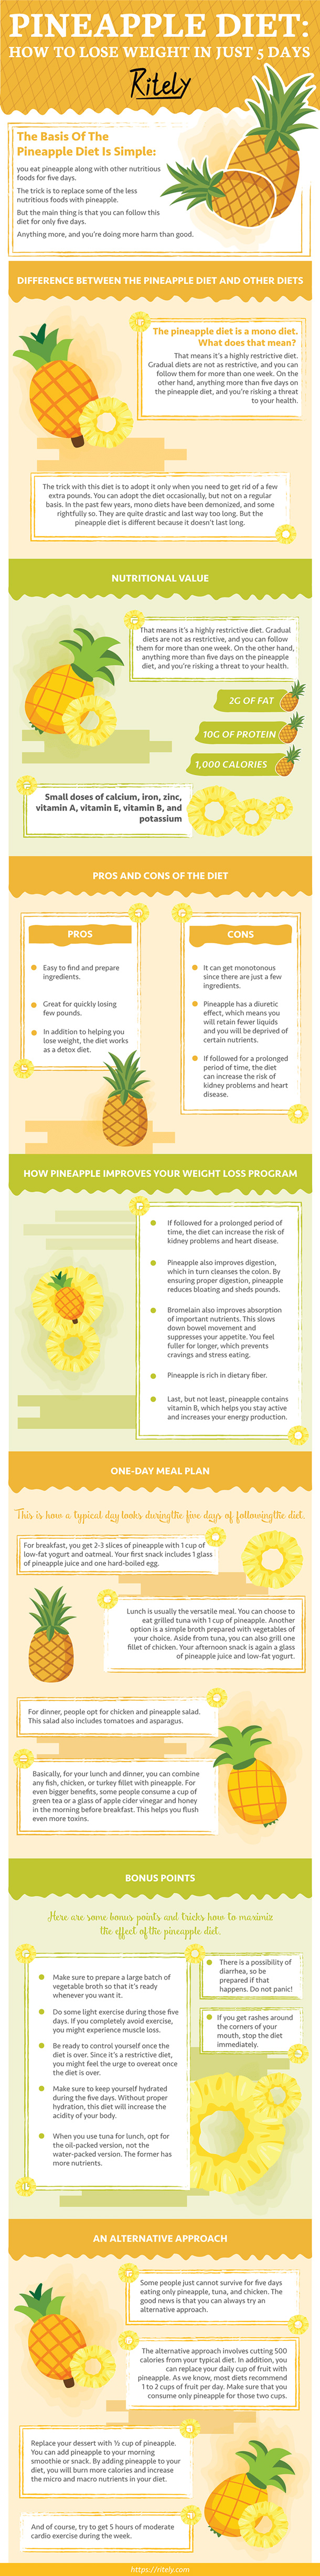 How to Lose Weight on the Pineapple Diet